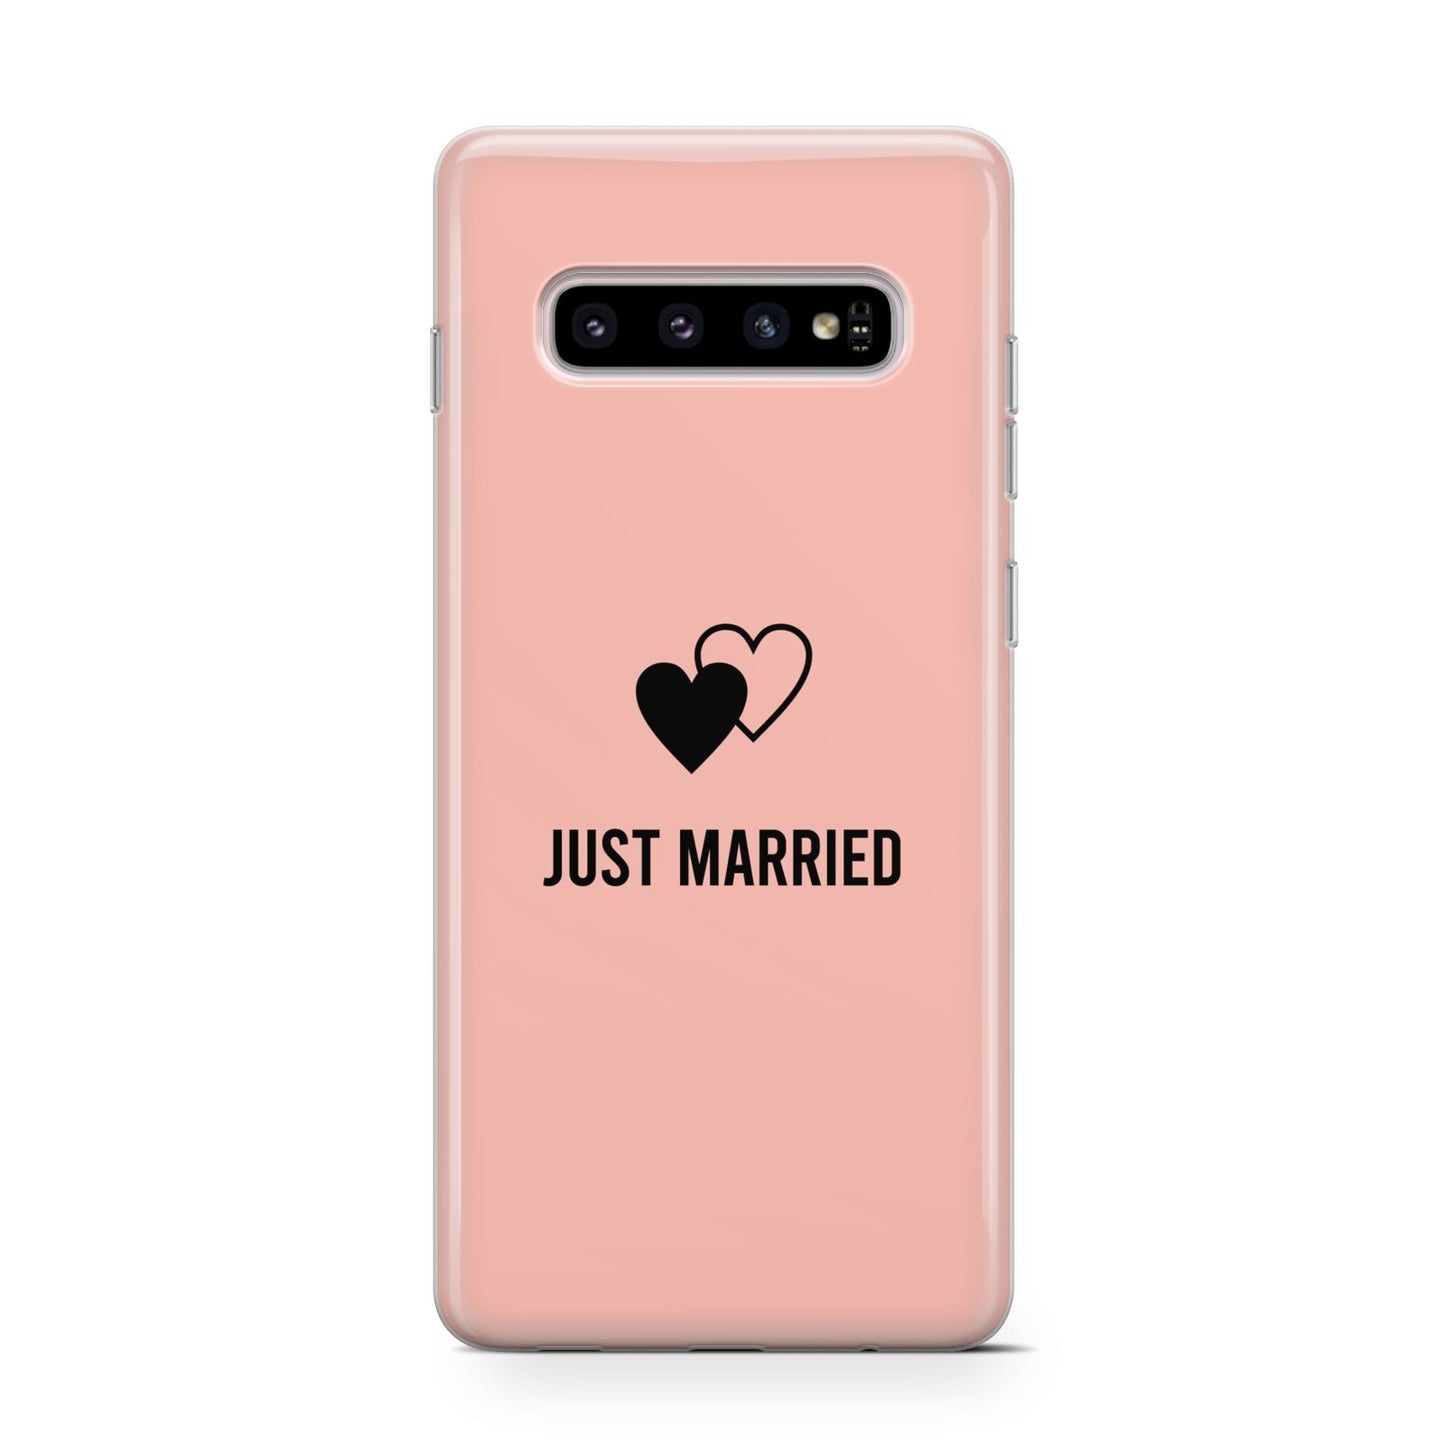 Just Married Samsung Galaxy S10 Case